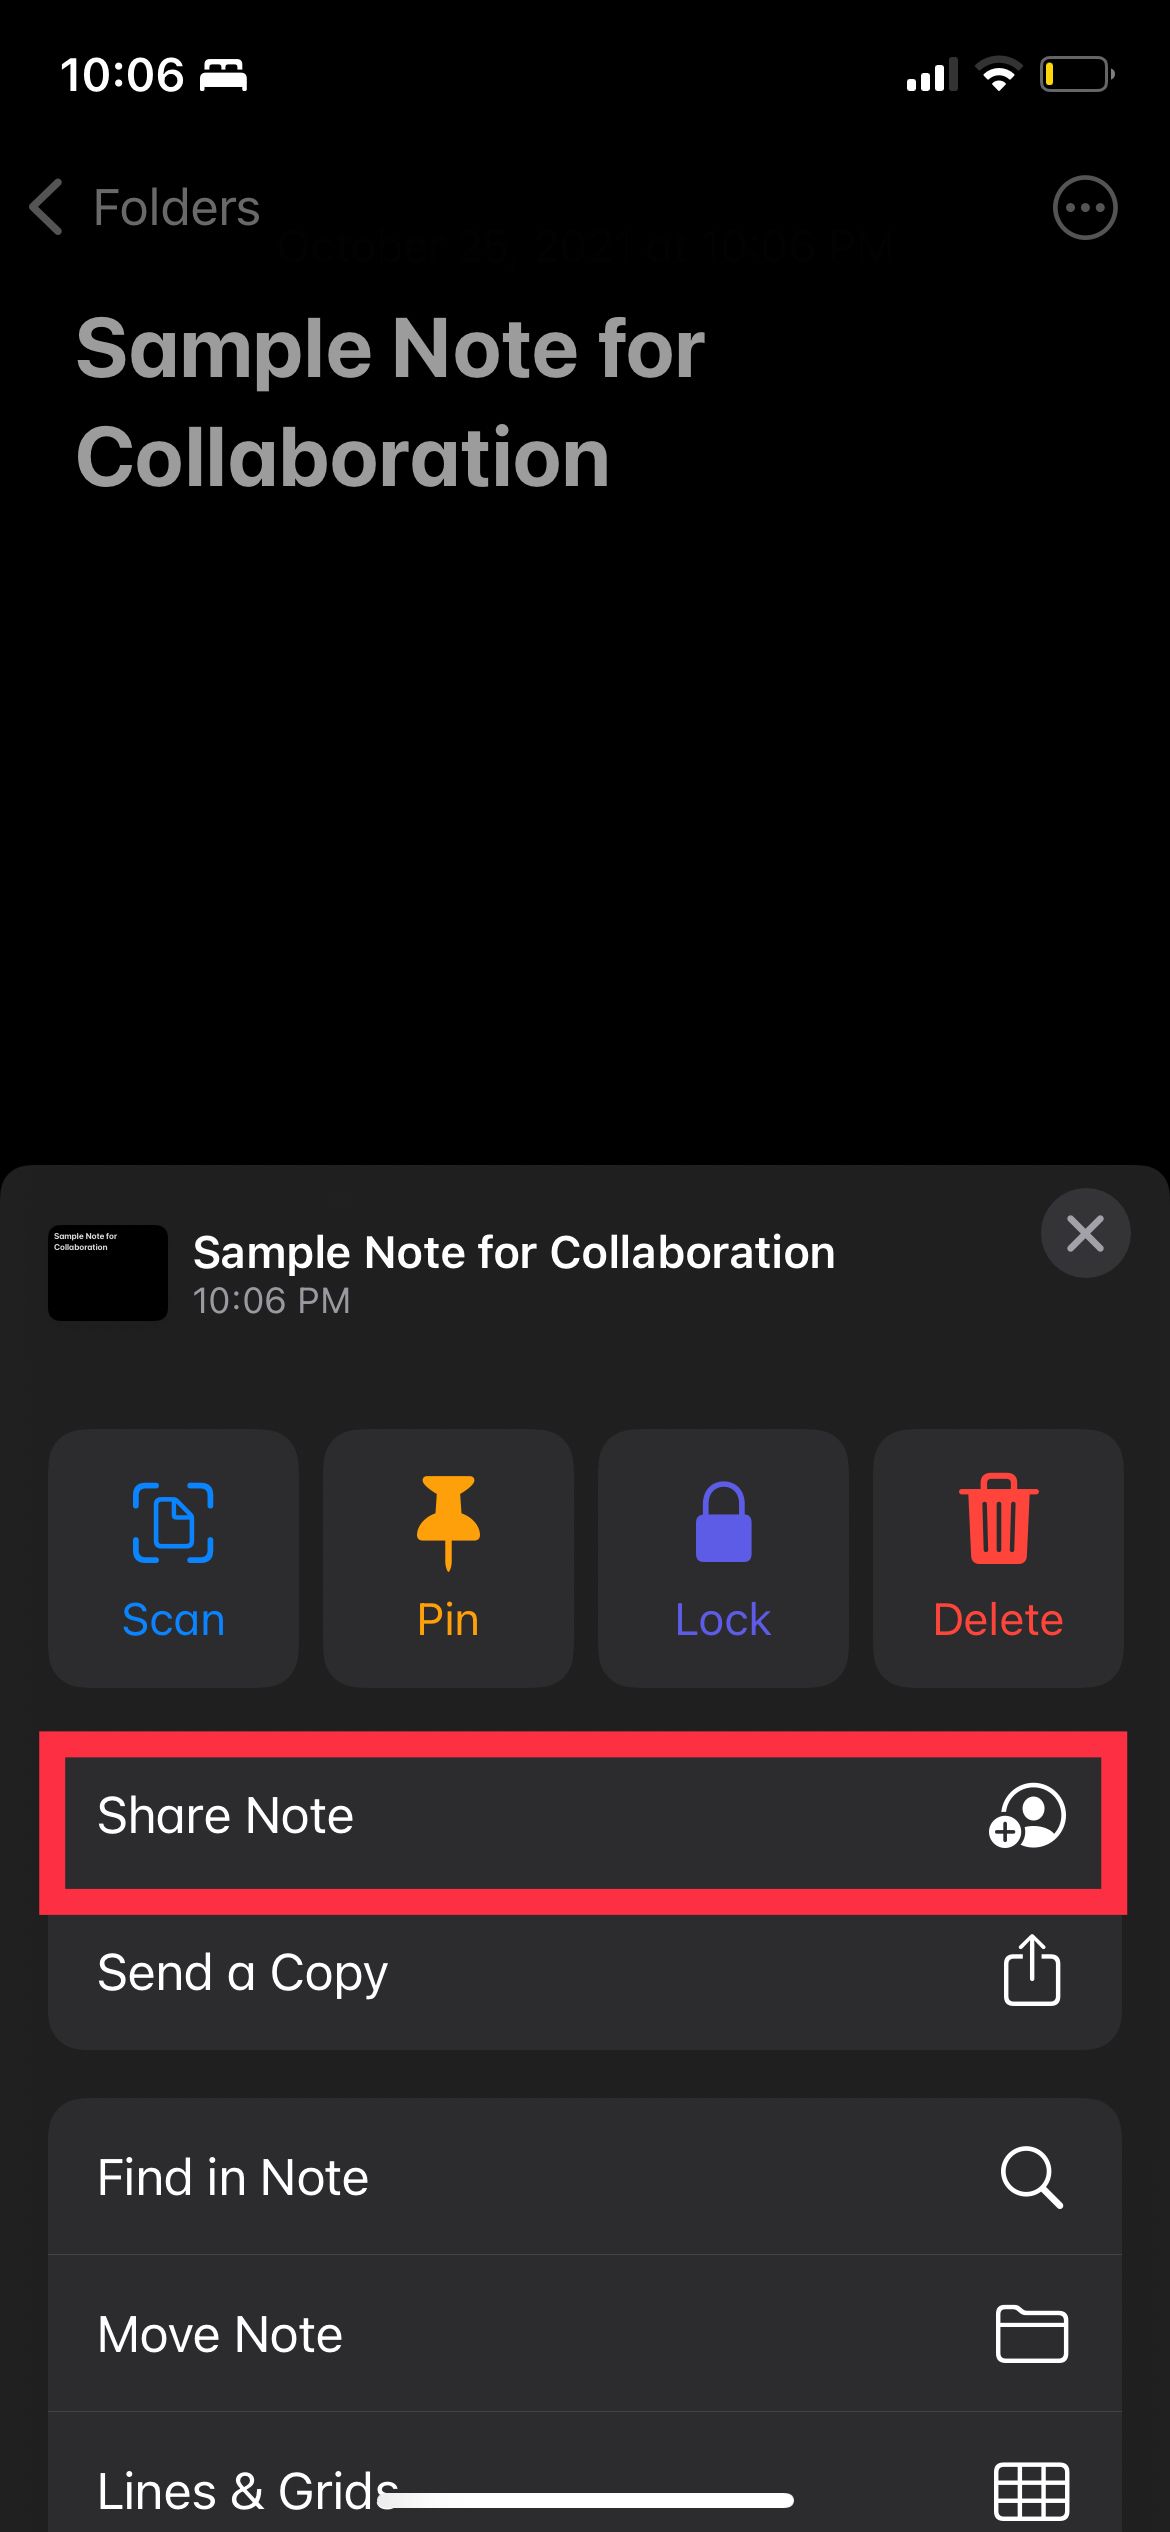 Share Note Option